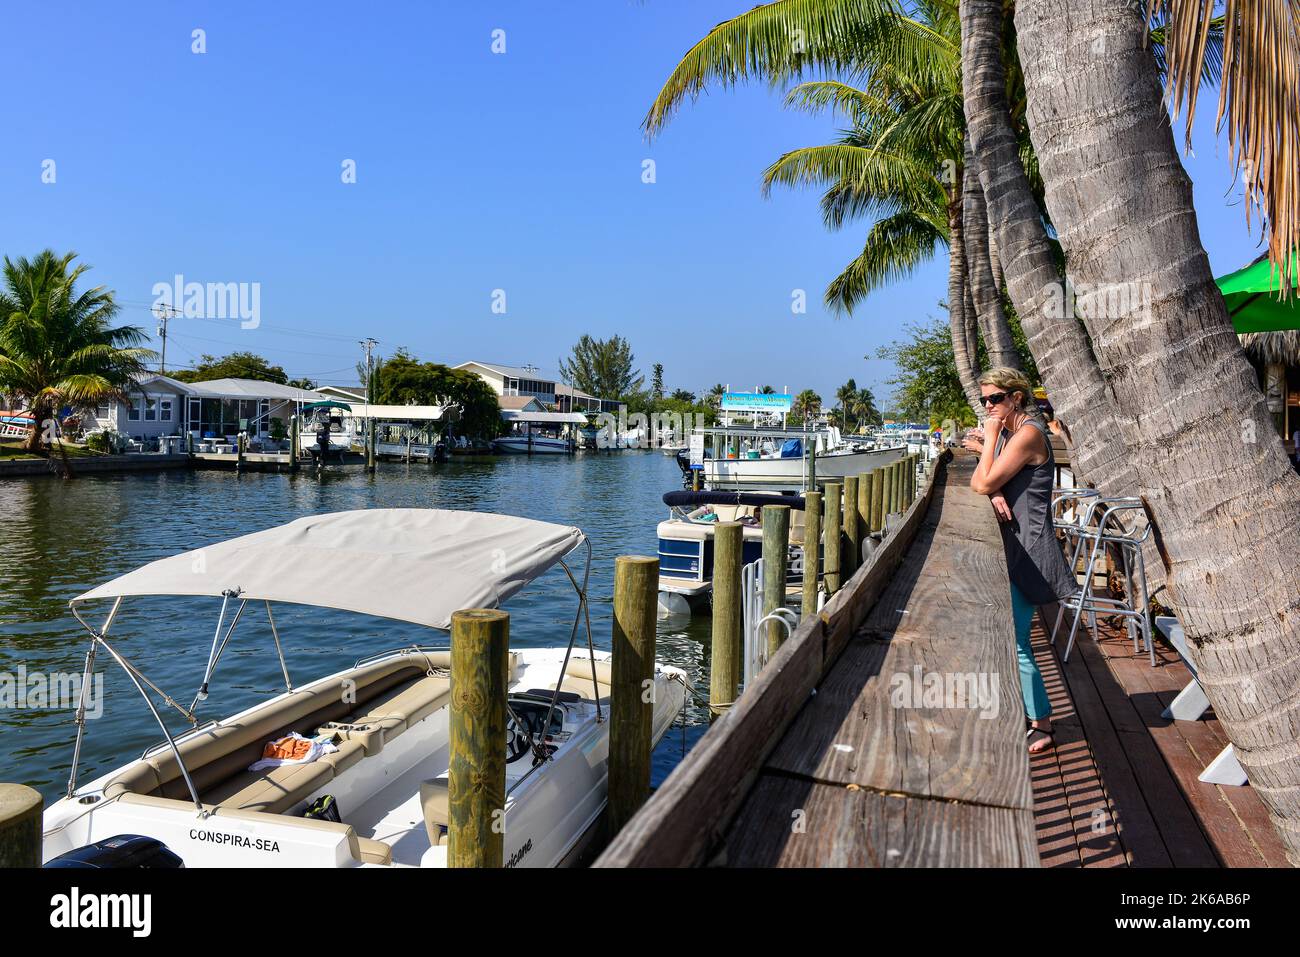 Woman viewing Boats docks along Crowded canal  near Phuzzys Boat Shack restaurant & bar in St. James City, Pine Island on Charlotte Harbor, Florida, b Stock Photo